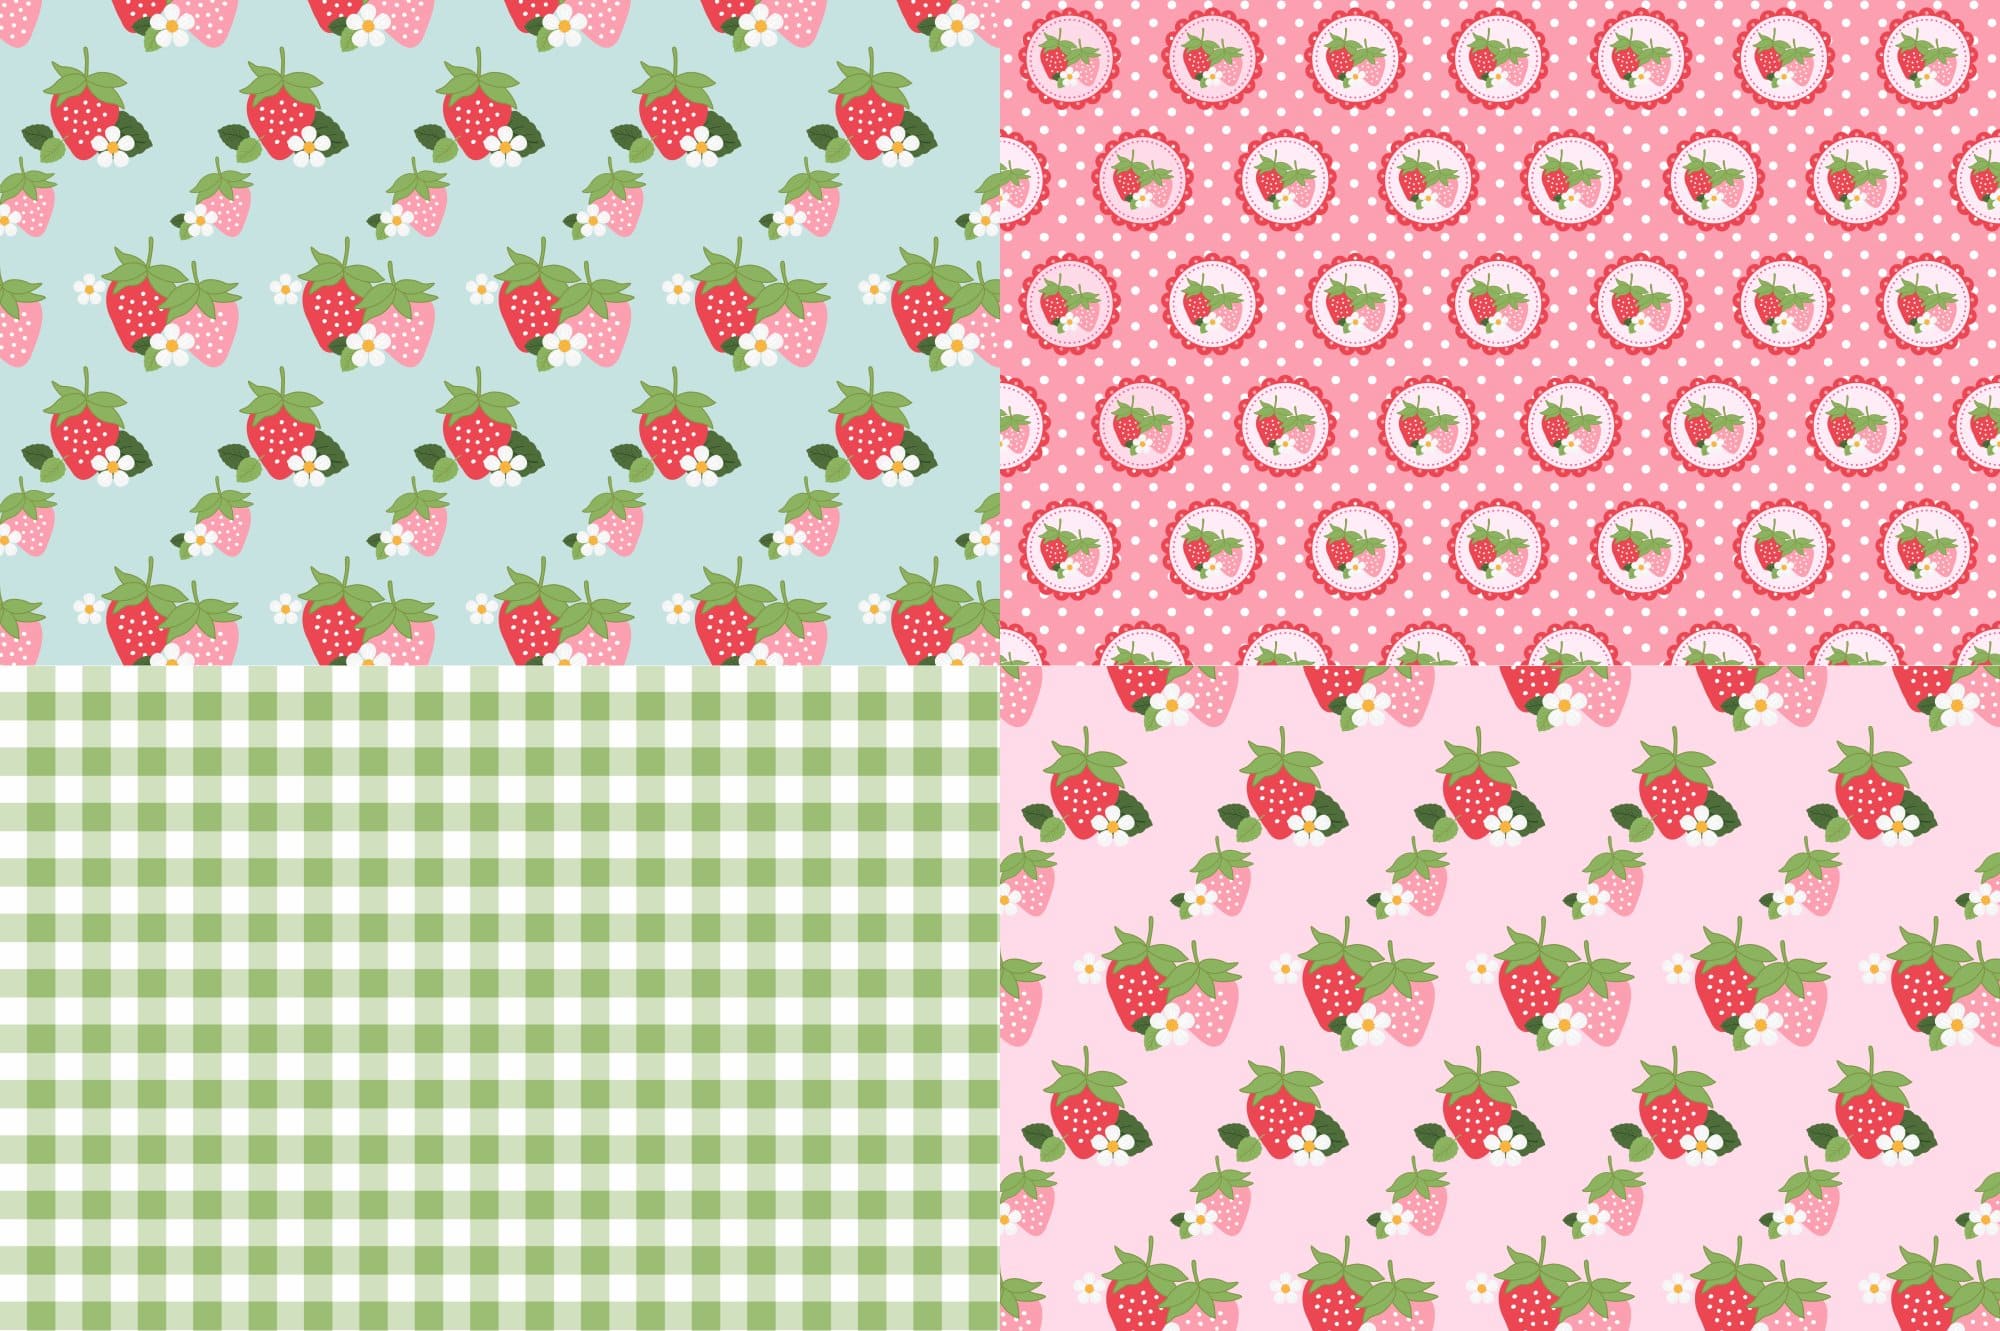 Three patterns of compositions of strawberries and flowers and one pattern in a green cell.